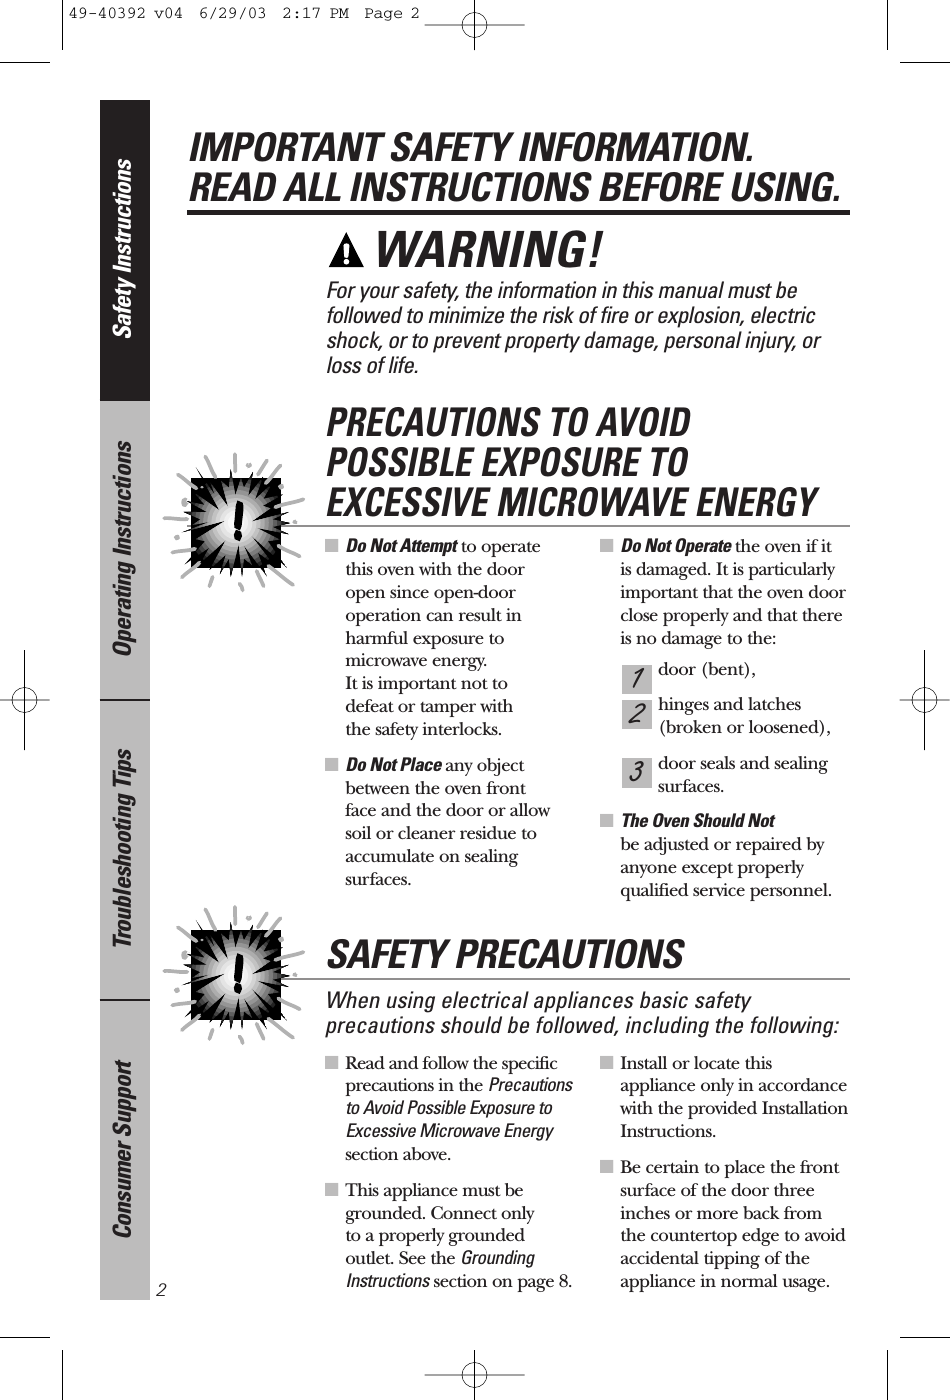 ■Read and follow the specificprecautions in the Precautionsto Avoid Possible Exposure toExcessive Microwave Energysection above.■This appliance must begrounded. Connect only to a properly grounded outlet. See the GroundingInstructions section on page 8.■Install or locate this appliance only in accordancewith the provided InstallationInstructions.■Be certain to place the frontsurface of the door threeinches or more back from the countertop edge to avoidaccidental tipping of theappliance in normal usage.■Do Not Attempt to operate this oven with the door open since open-dooroperation can result inharmful exposure tomicrowave energy. It is important not to defeat or tamper with the safety interlocks.■Do Not Place any objectbetween the oven front face and the door or allowsoil or cleaner residue toaccumulate on sealing surfaces.■Do Not Operate the oven if it is damaged. It is particularlyimportant that the oven doorclose properly and that thereis no damage to the:door (bent),hinges and latches (broken or loosened),door seals and sealingsurfaces.■The Oven Should Not be adjusted or repaired by anyone except properly qualified service personnel.321PRECAUTIONS TO AVOID POSSIBLE EXPOSURE TO EXCESSIVE MICROWAVE ENERGYSafety InstructionsOperating InstructionsTroubleshooting TipsConsumer SupportIMPORTANT SAFETY INFORMATION.READ ALL INSTRUCTIONS BEFORE USING.2For your safety, the information in this manual must be followed to minimize the risk of fire or explosion, electricshock, or to prevent property damage, personal injury, or loss of life.WARNING! When using electrical appliances basic safetyprecautions should be followed, including the following:SAFETY PRECAUTIONS49-40392 v04  6/29/03  2:17 PM  Page 2